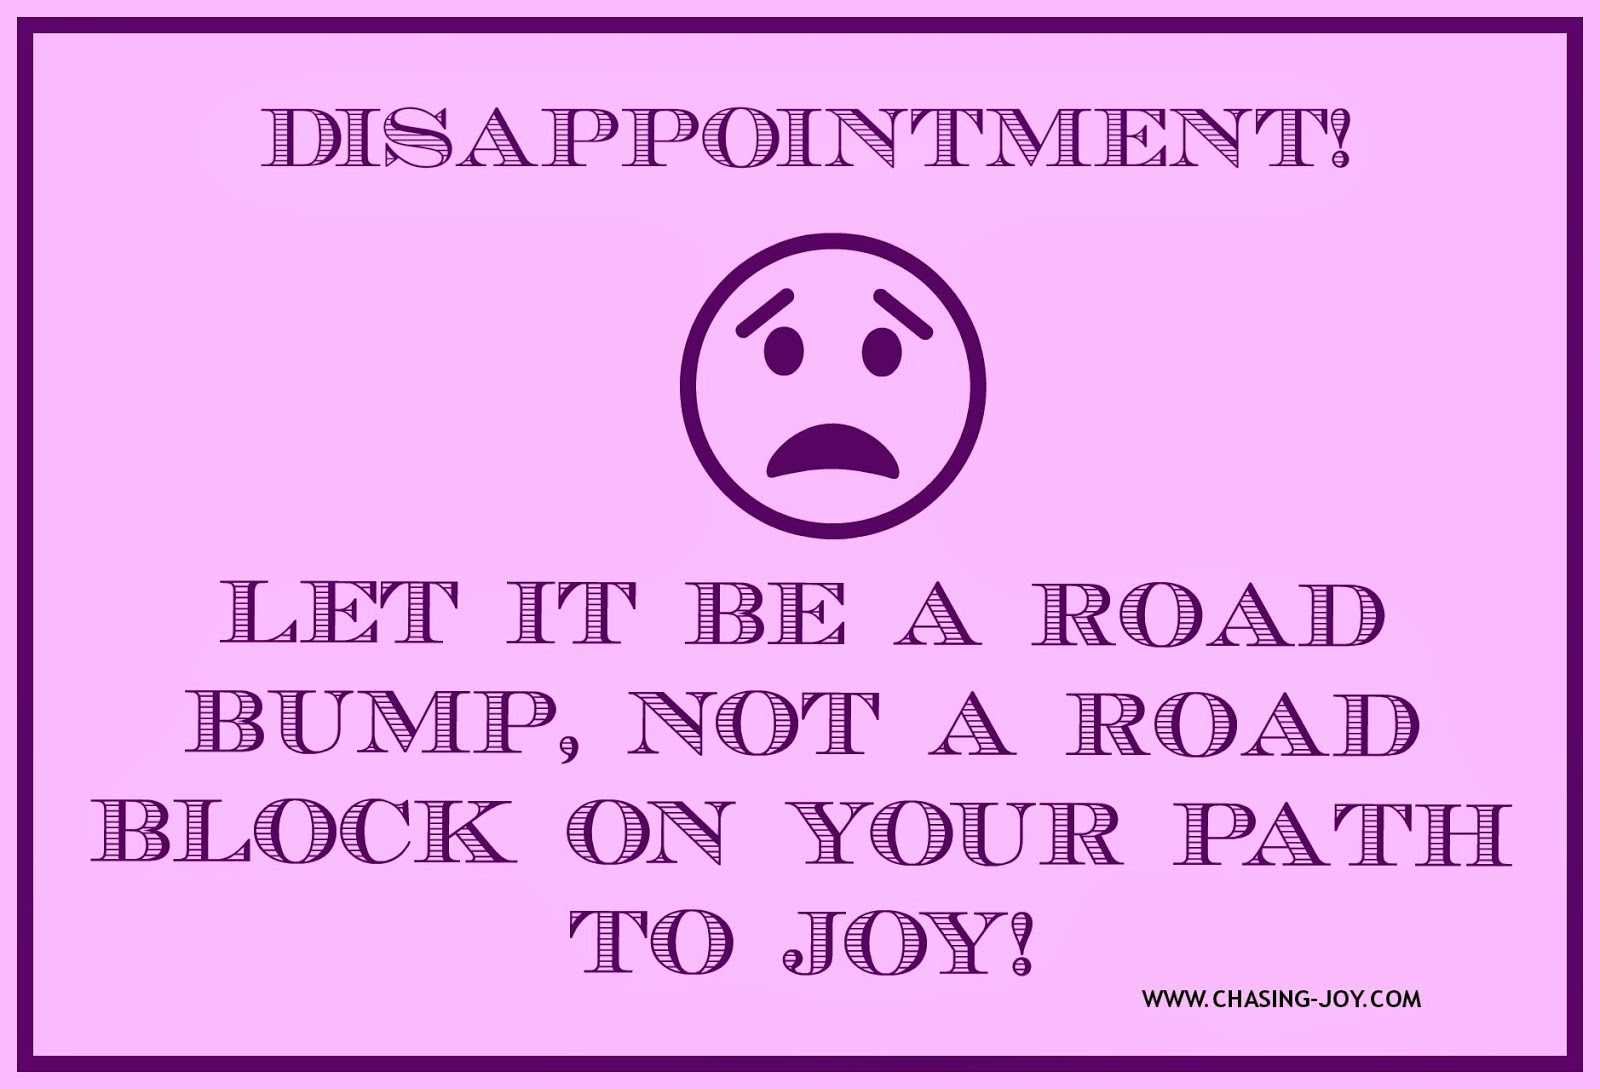 Friendship Disappointment Quotes
 Disappointed Friendship Quotes QuotesGram